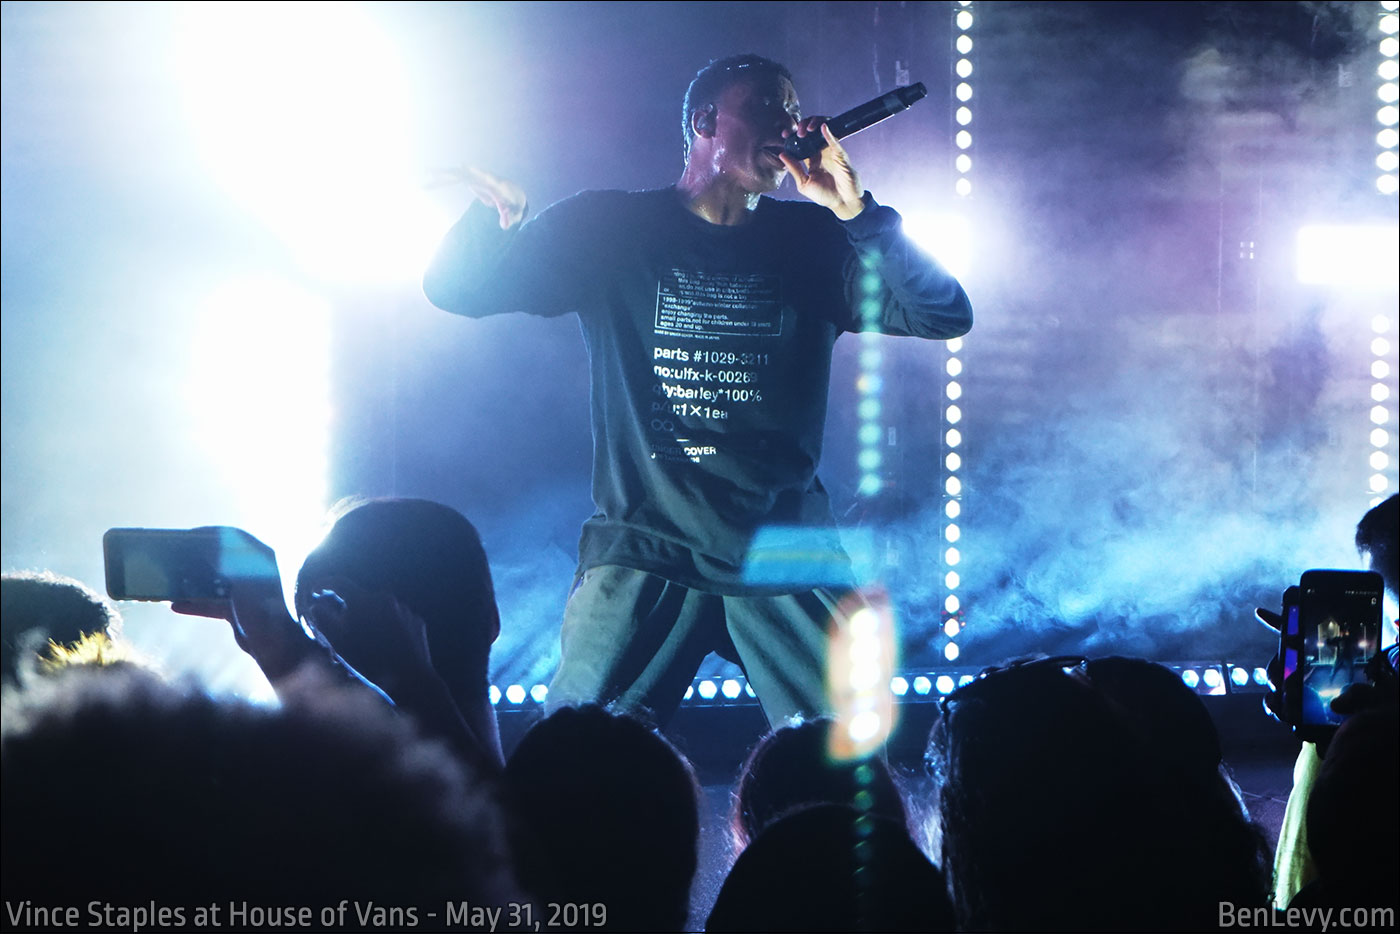 Vince Staples at House of Vans